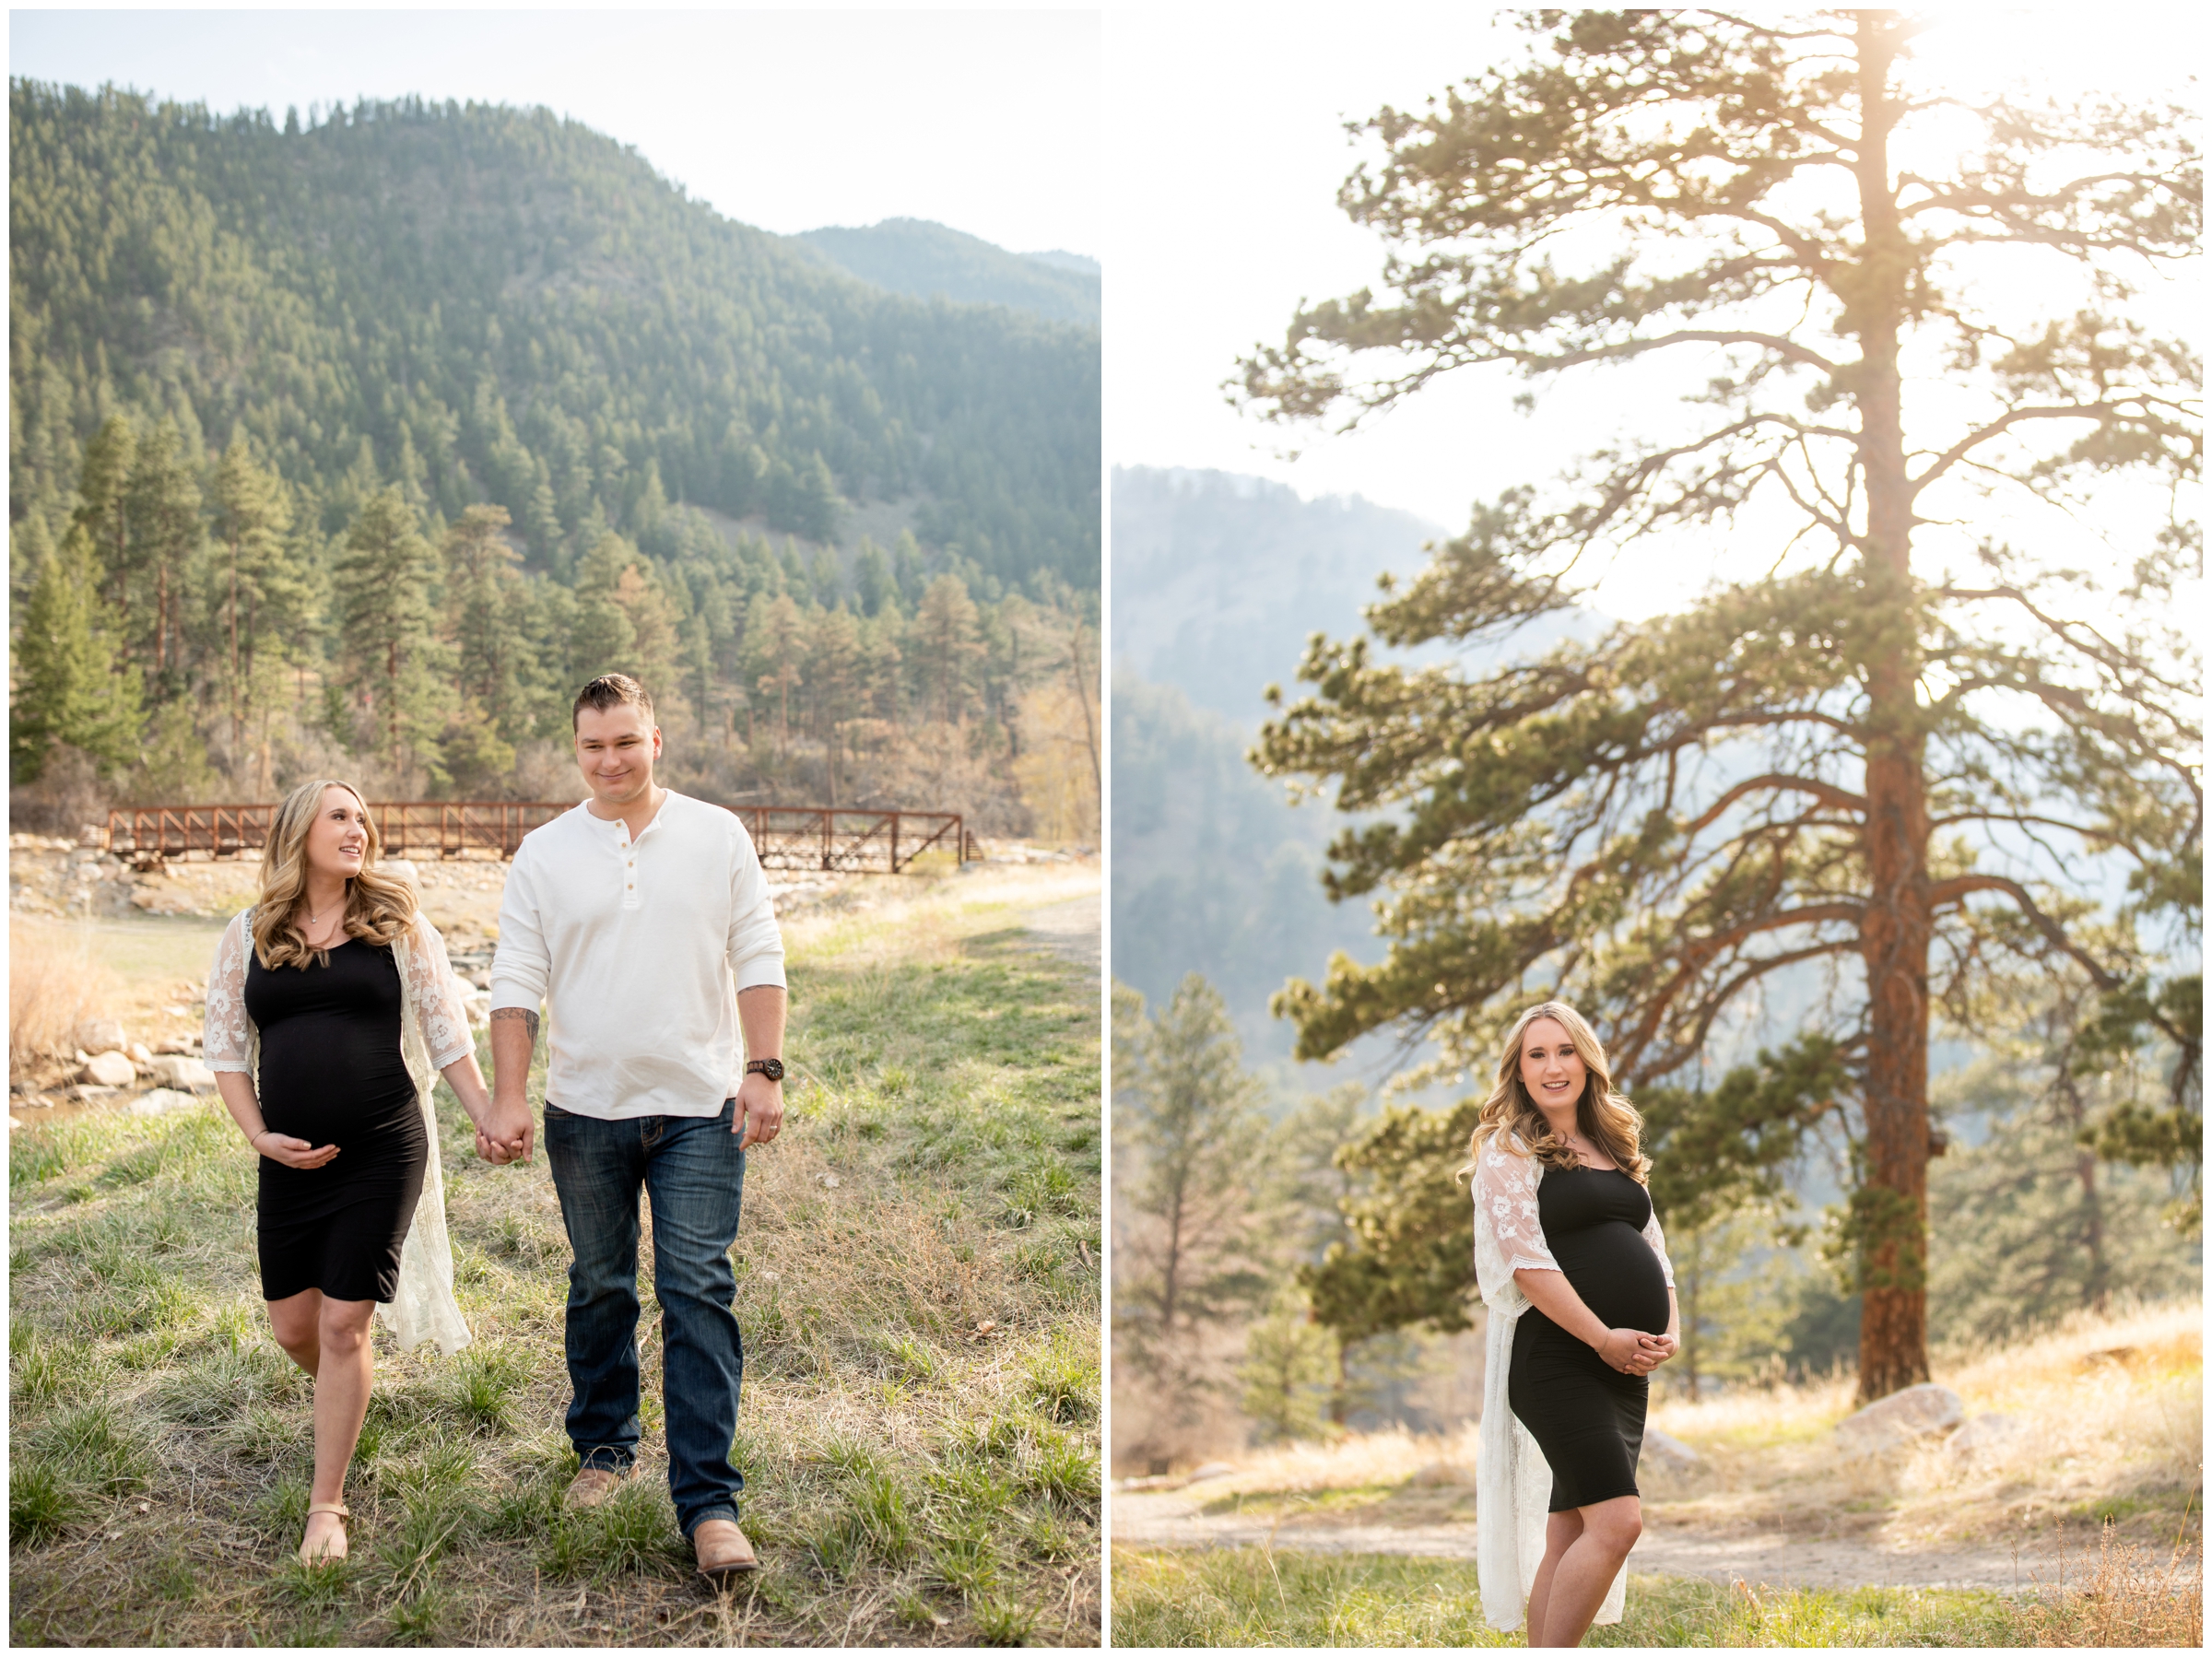 couple walking with mountains in background during Loveland maternity photos at Viestenz-Smith Park by Colorado portrait photographer Plum Pretty Photography